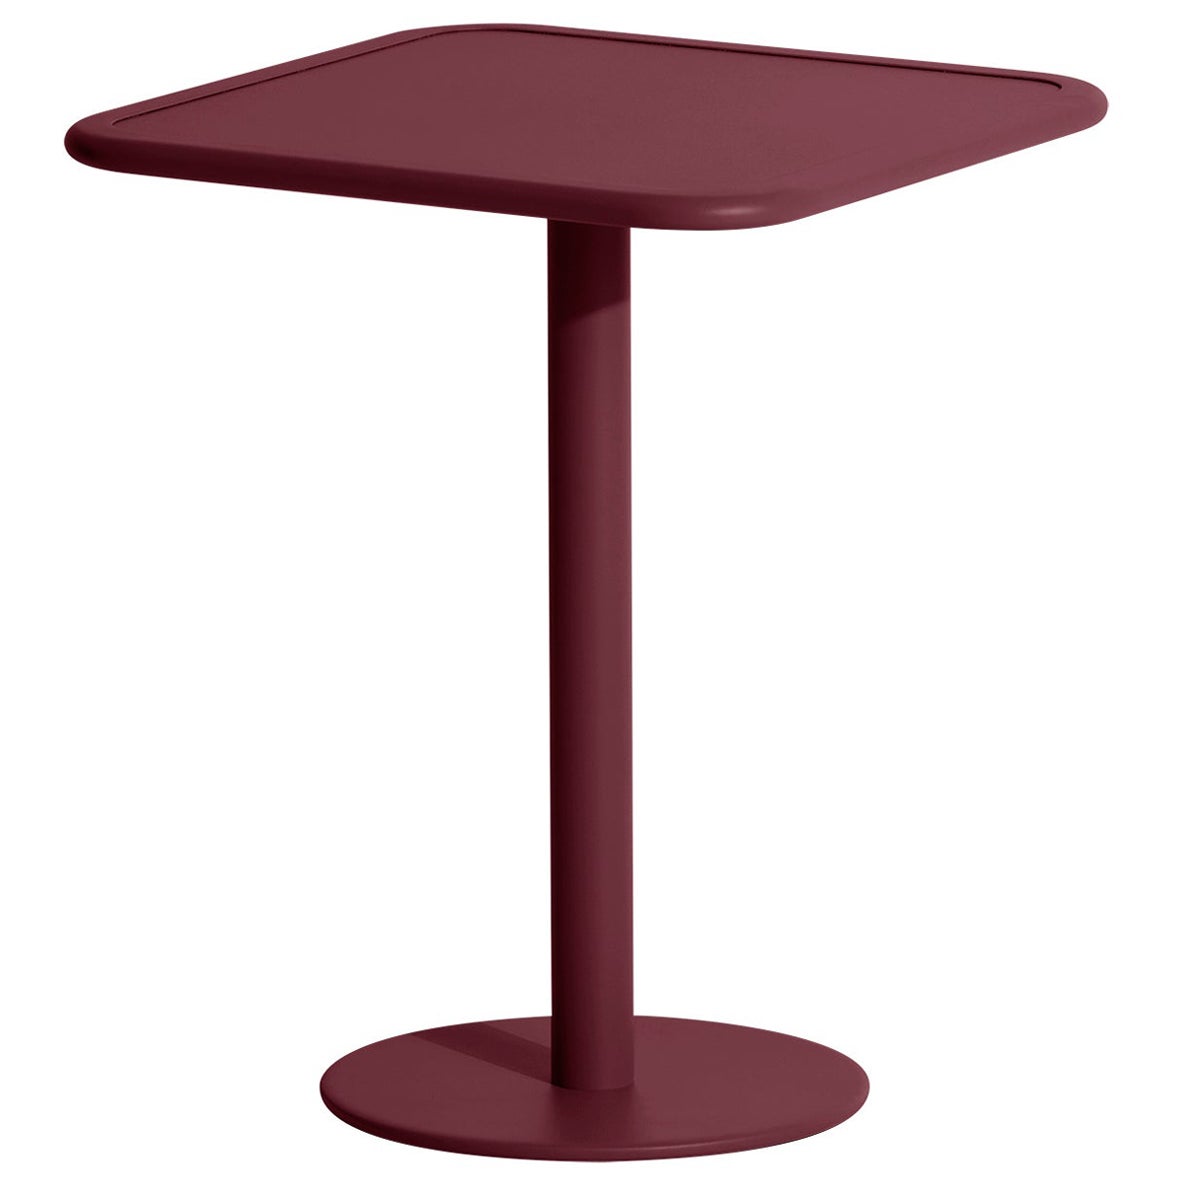 Petite Friture Week-End Bistro Square Dining Table in Burgundy Aluminium, 2017 For Sale